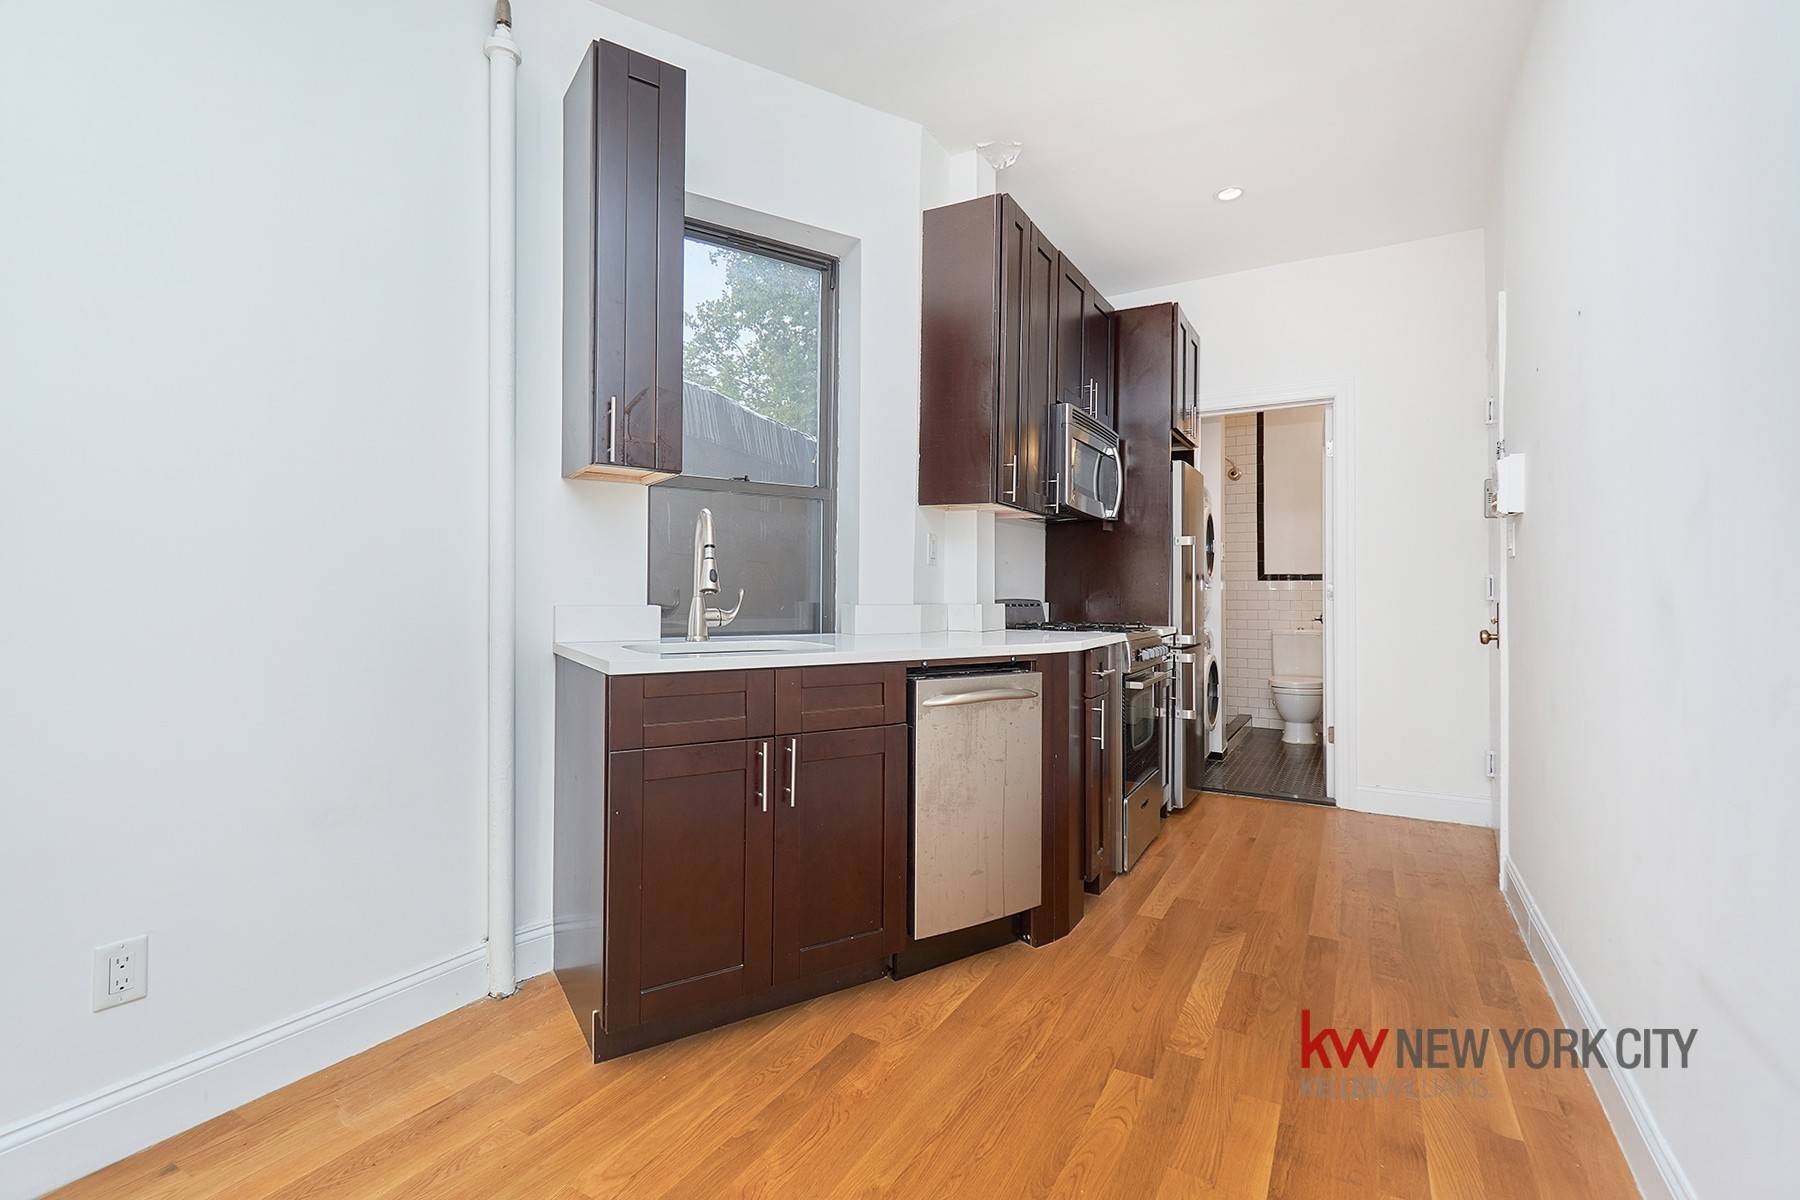 This is the LOWEST PRICED 1 bedroom option available for rent in the ENTIRE Boerum Hill area.